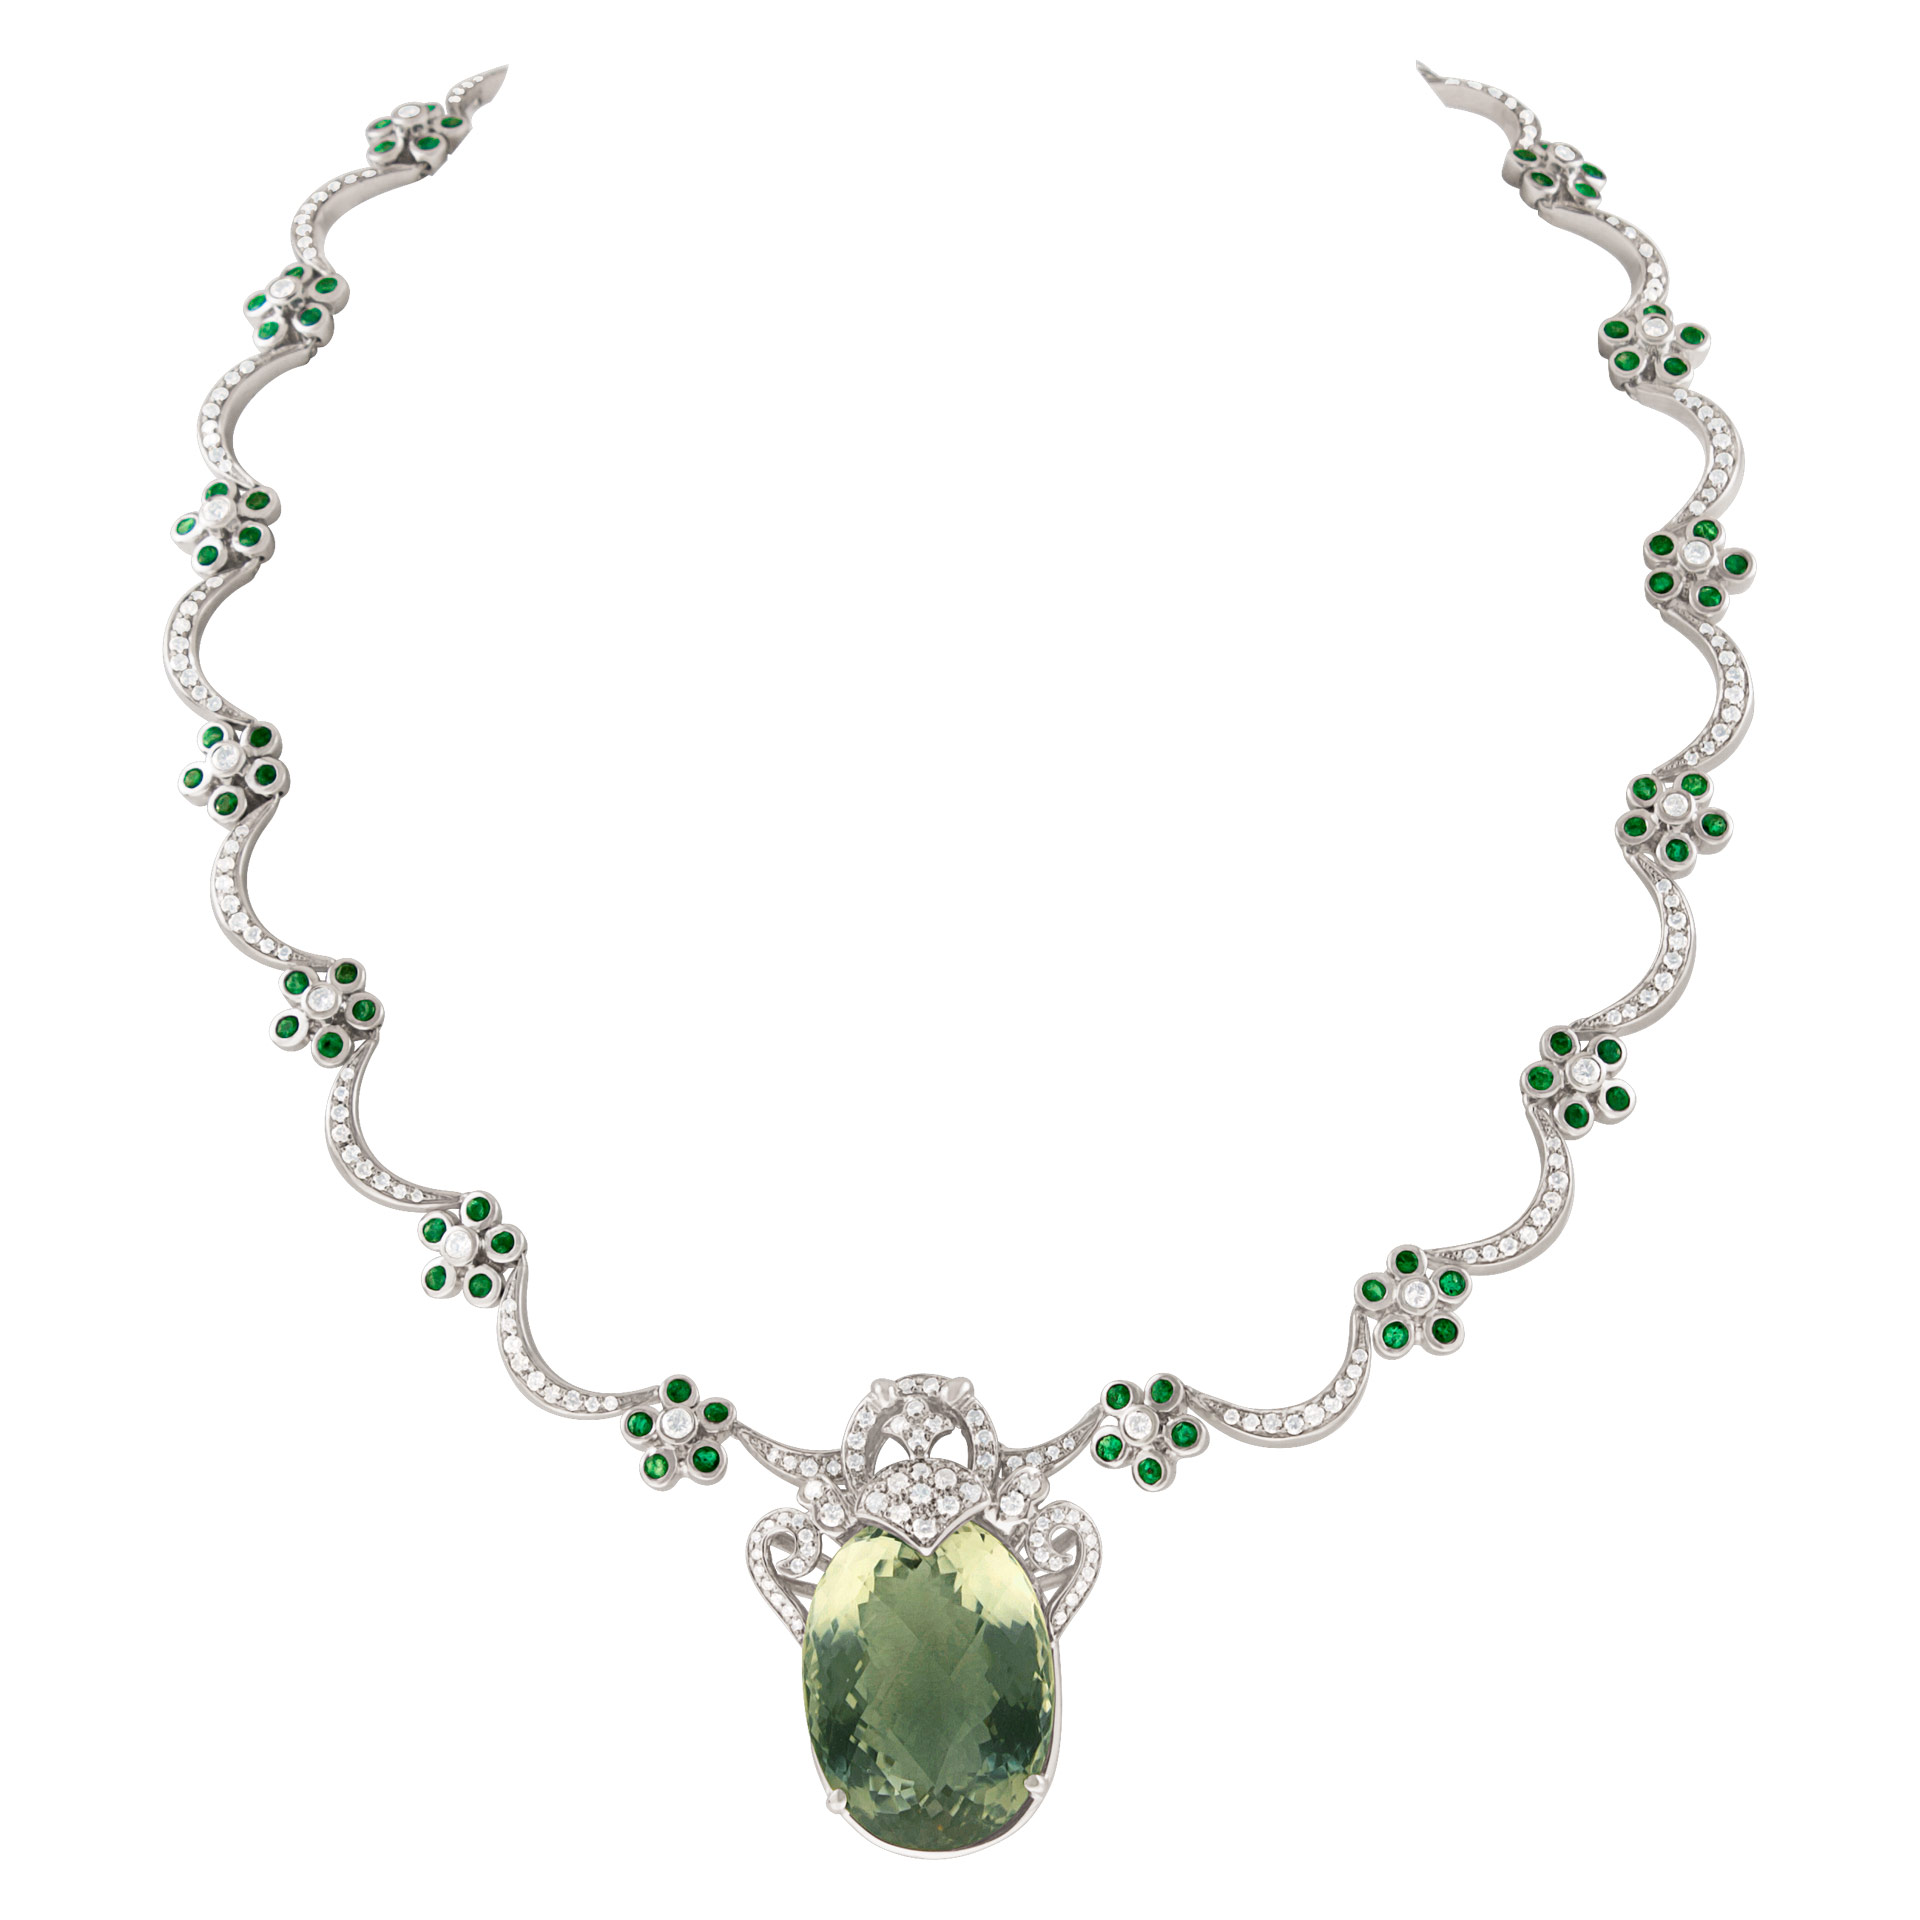 Green amethyst, diamond & emerald necklace in 14k white gold